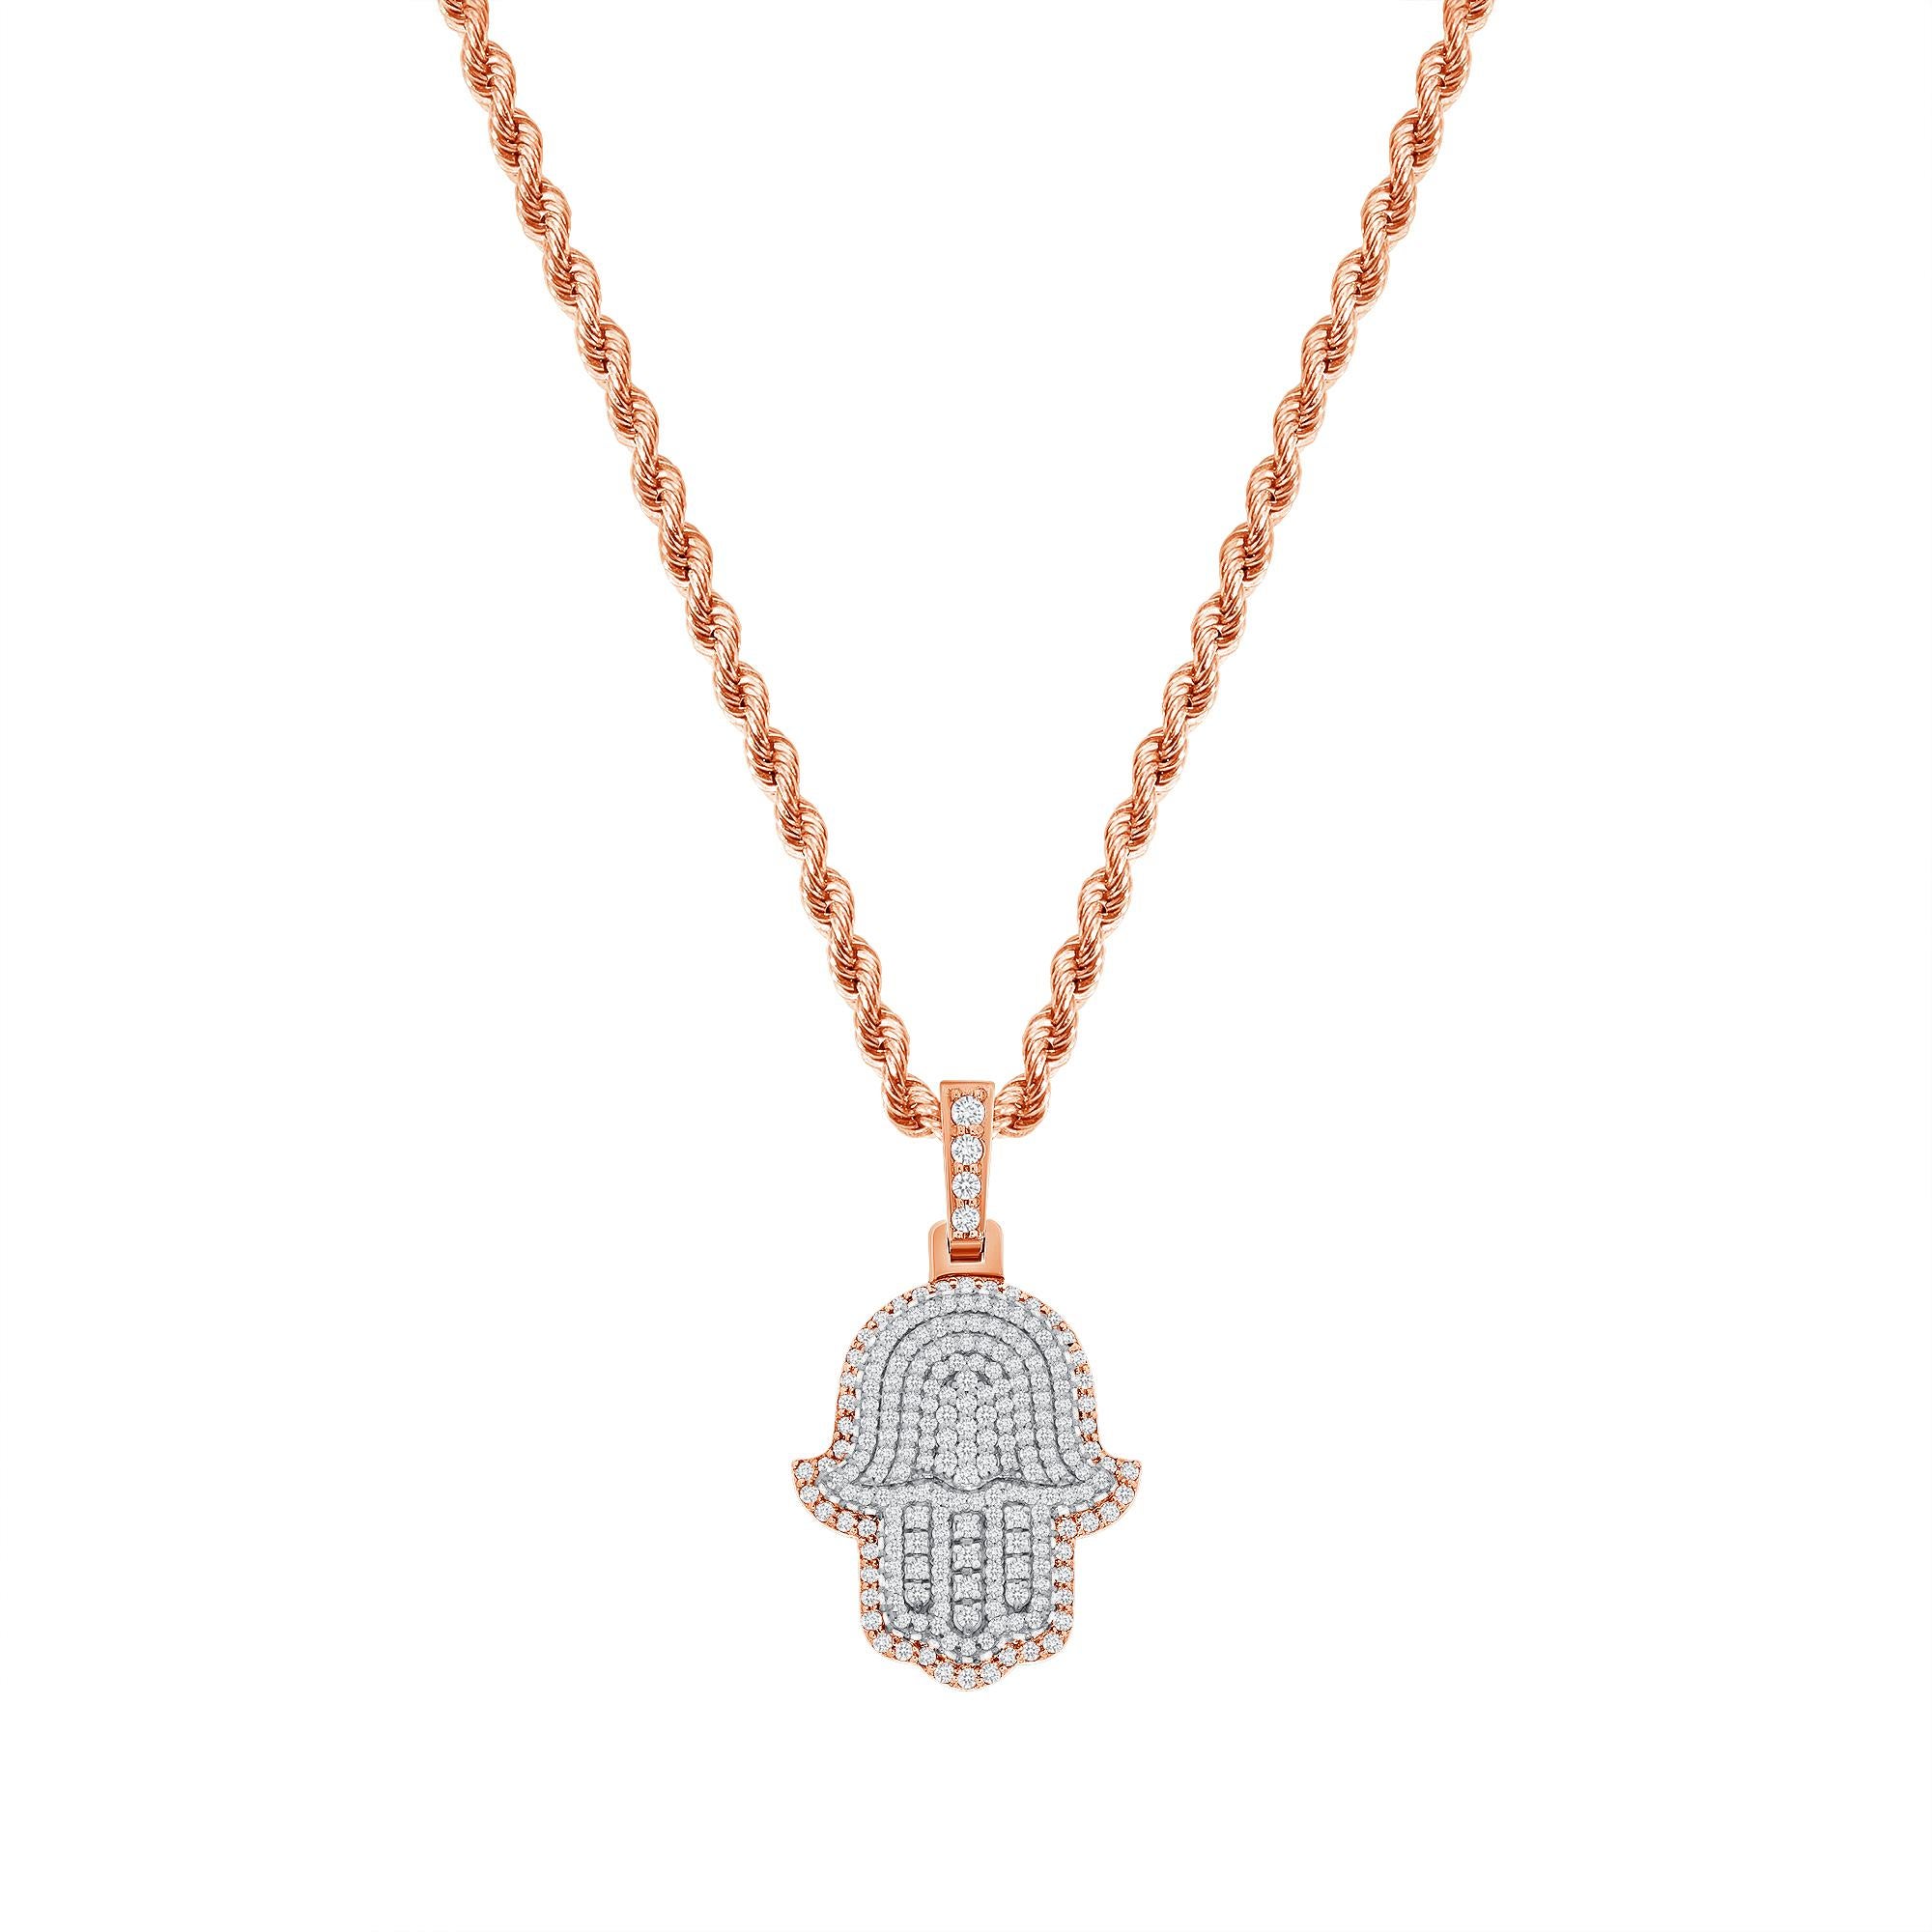 This Hamsa diamond necklace provides both a spiritual and fashionable on trend look. 

Metal: 14k Gold
Diamond Cut: Round
Total Diamond Carats: 2 Carats
Diamond Clarity: VS
Diamond Color: F-G
Necklace Length: 24 Inches
Color: Rose Gold
